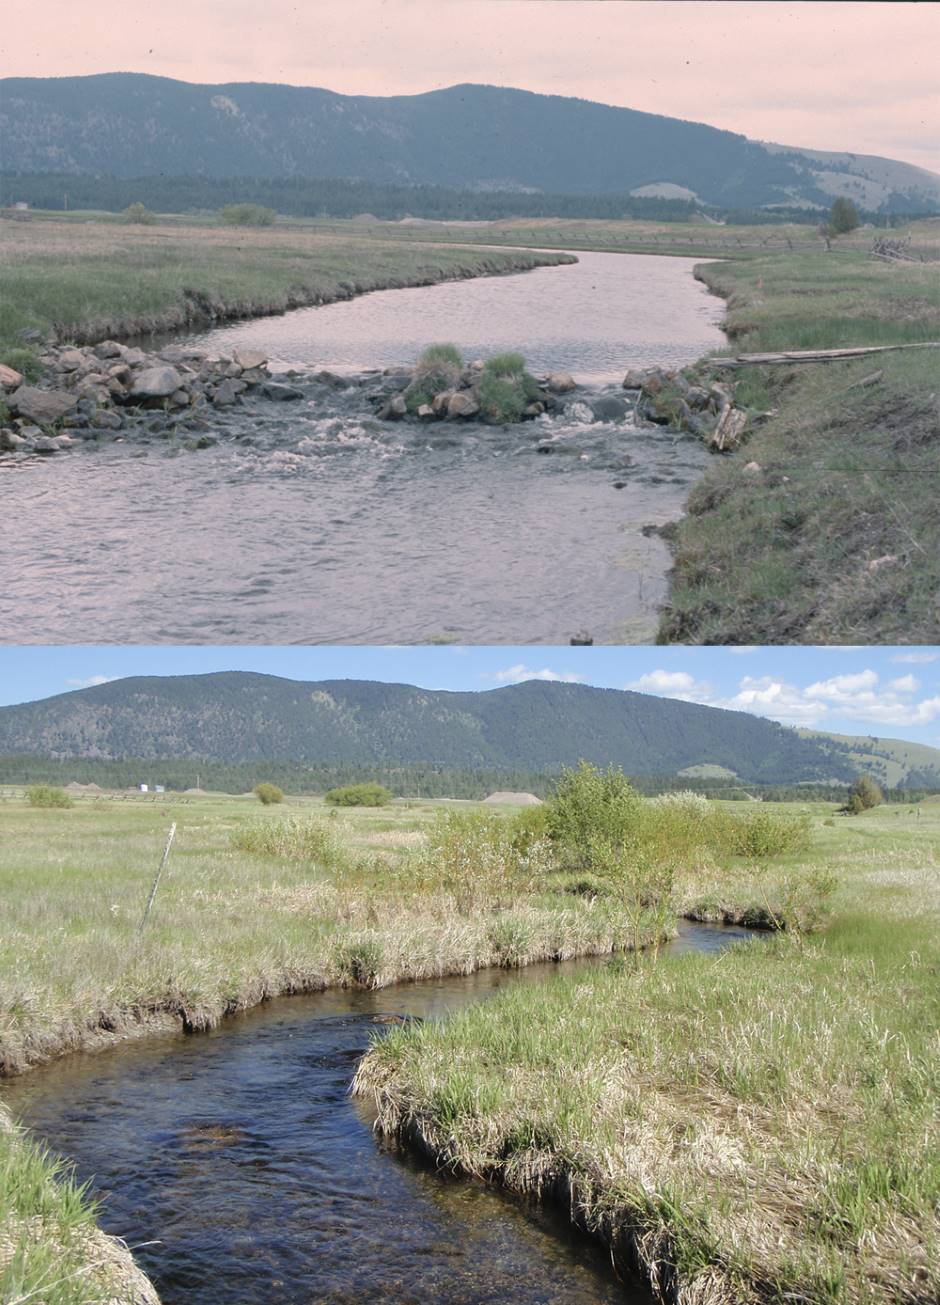 Photos of the same point on Kleinschmidt Creek from 2001, top, and 2014, bottom, show the new narrower, winding channel. (Courtesy Ron Pierce)